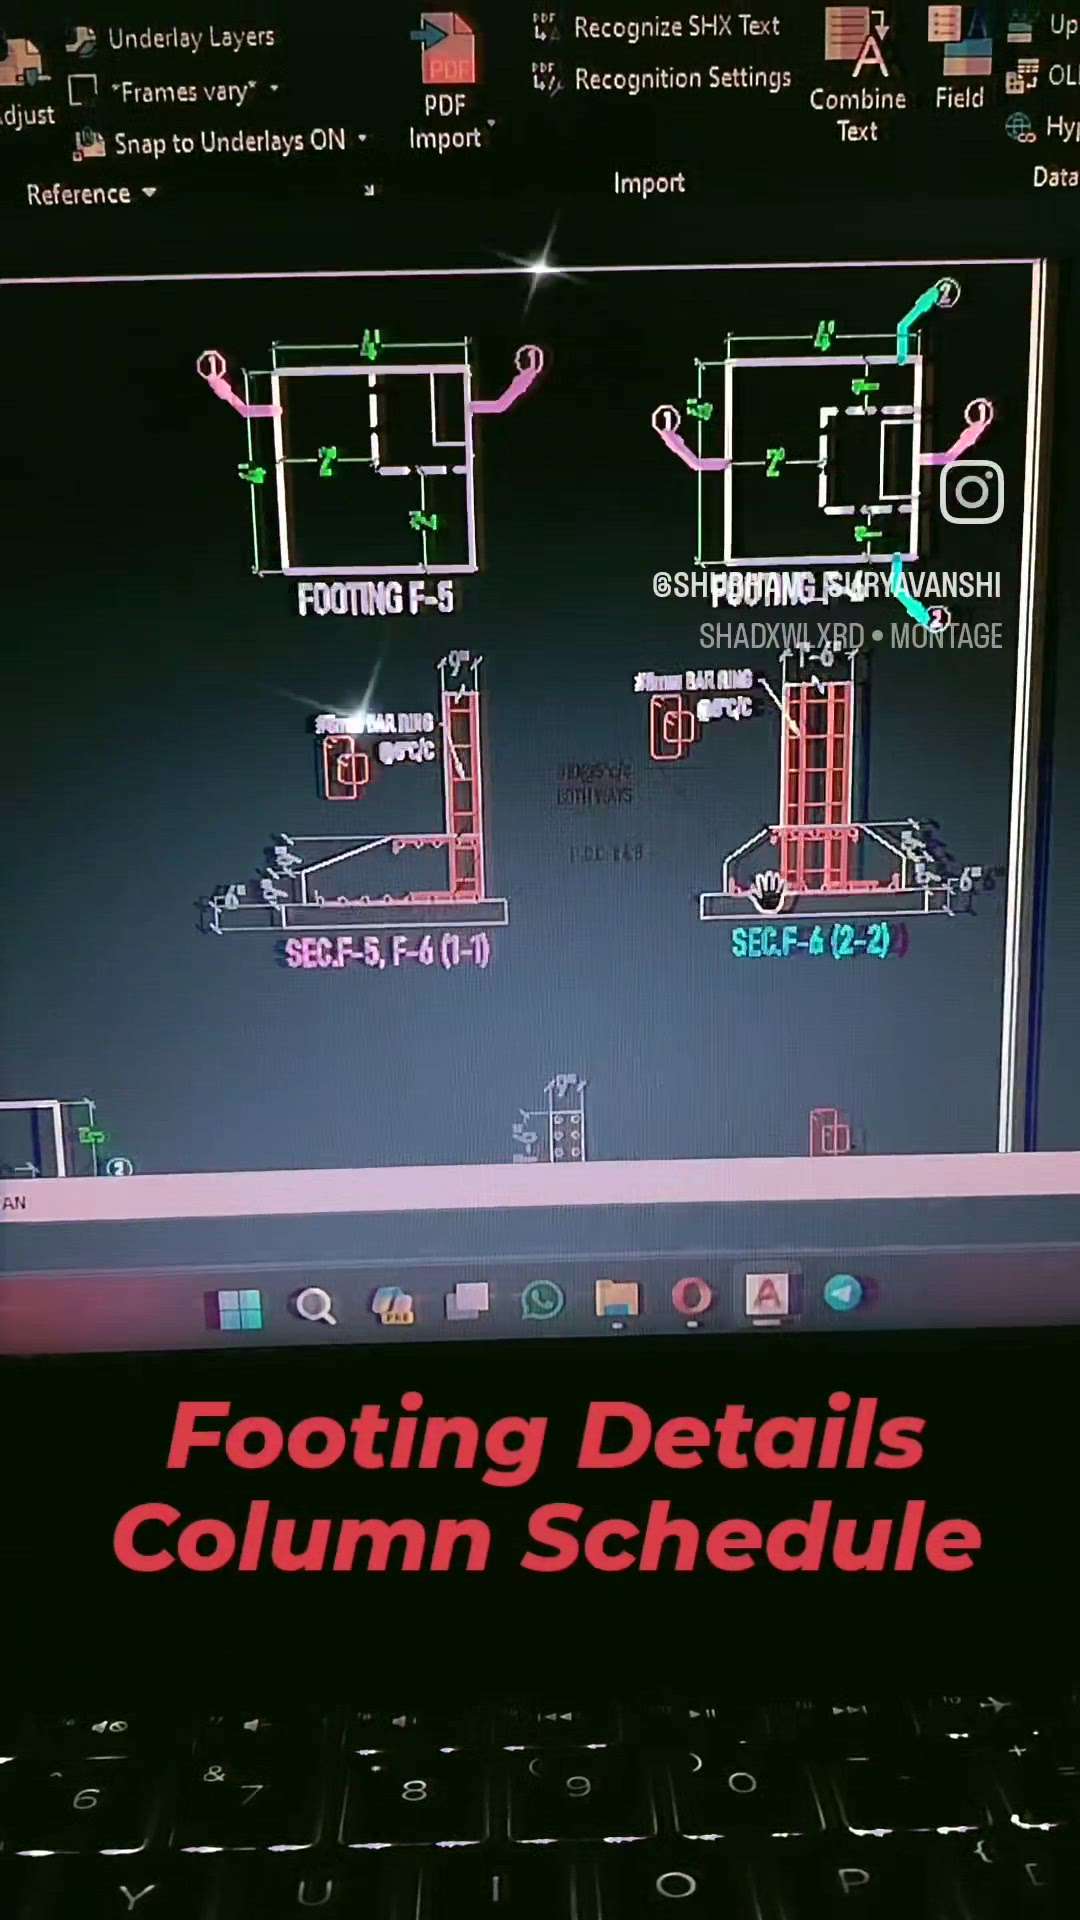 Footing Details
column Schedule
We provide
✔️ Floor Planning,
✔️ Vastu consultation
✔️ site visit, 
✔️ Steel Details,
✔️ 3D Elevation and further more!
#civil #civilengineering #engineering #plan #planning #houseplans #nature #house #elevation #blueprint #staircase #roomdecor #design #housedesign #skyscrapper #civilconstruction #houseproject #construction #dreamhouse #dreamhome #architecture #architecturephotography #architecturedesign #autocad #staadpro #staad #bathroom